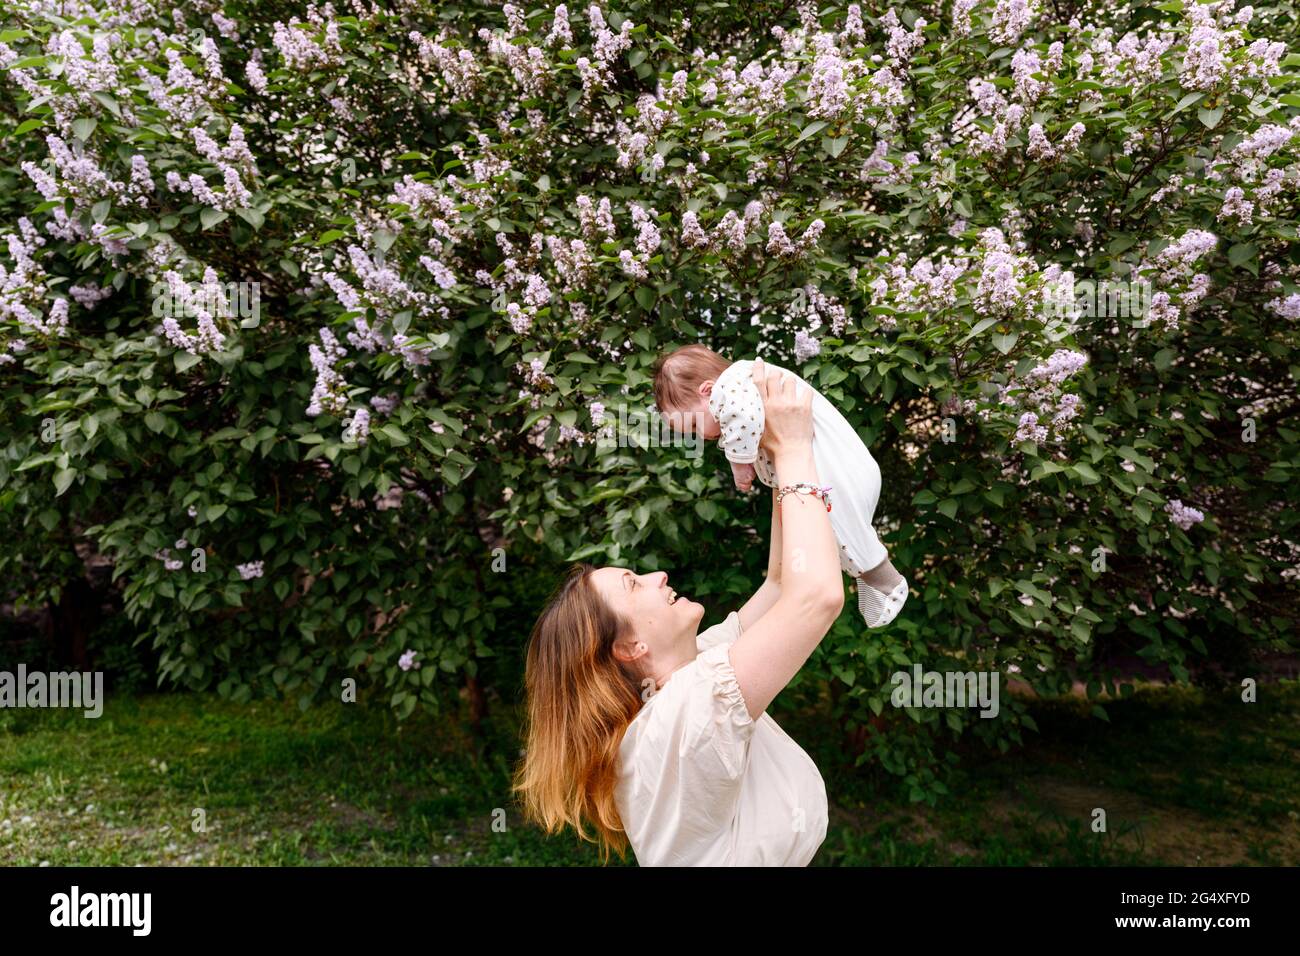 Mother picking up baby girl by flowering plant at park Stock Photo